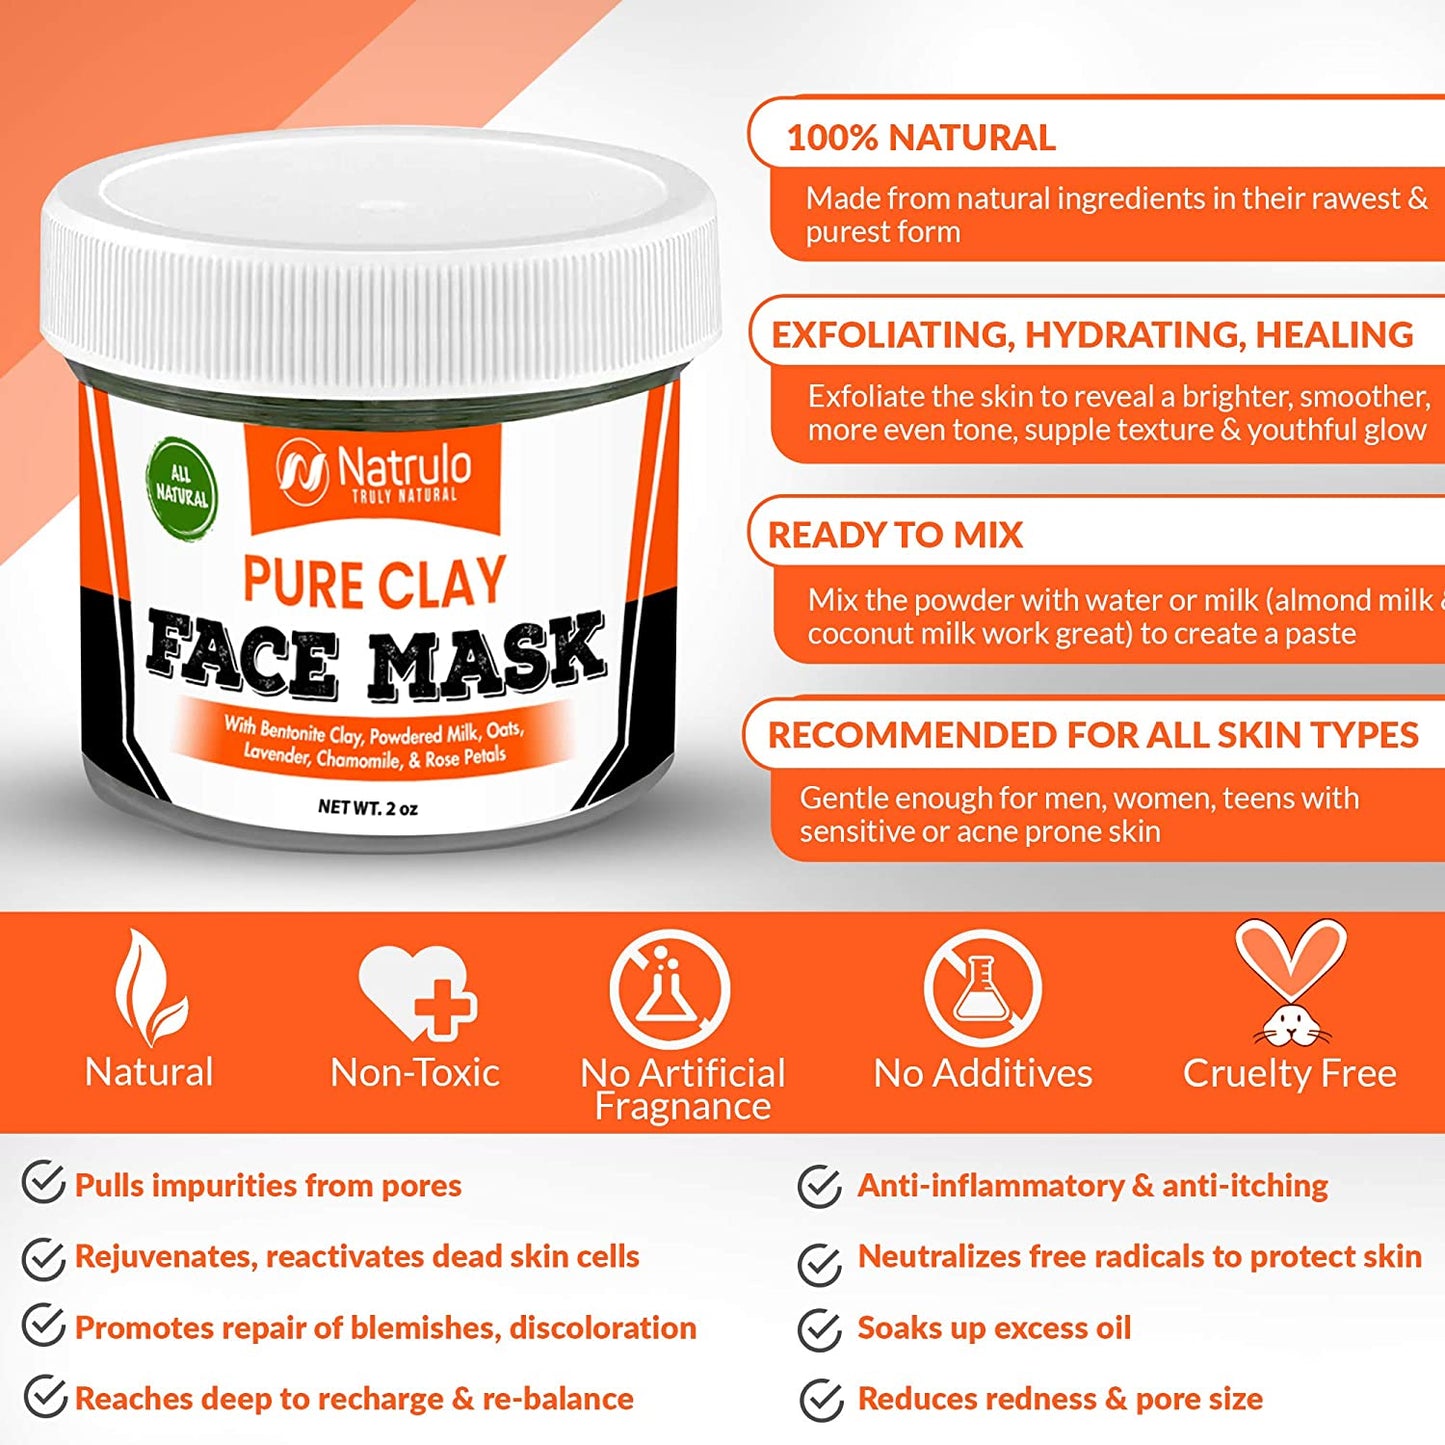 Pure Clay Mask